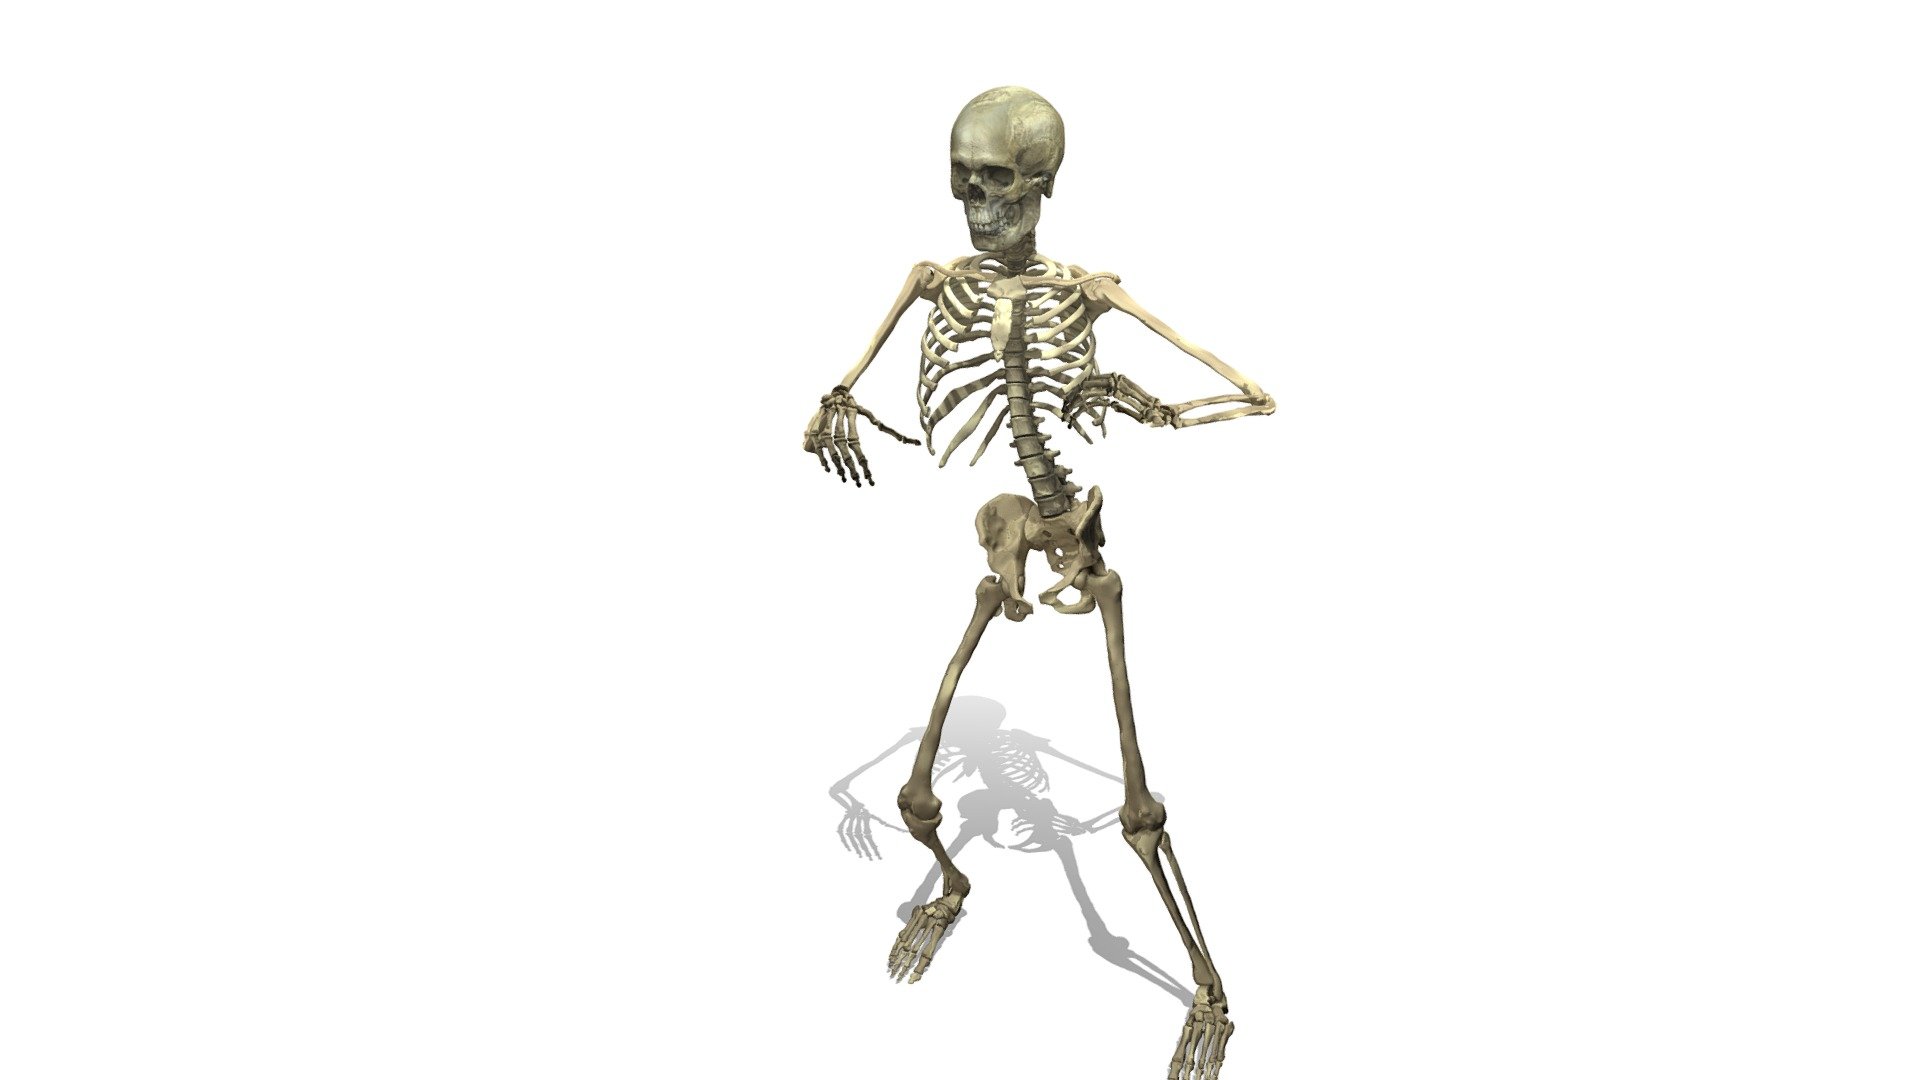 skeleton modeled, textured and rigged in blender with mixamo addon controllers, so the extra bones, ready animation of dance, blend file. and textures in the .zip, for more models follow us and leave your like, this helps too much.

follow me also on:https://www.instagram.com/bruno_sales3d/

follow me also on:https://www.youtube.com/channel/UCPYlxbKmUBVdrORonYKqUZg - SKELETON - rigged and animated model - Buy Royalty Free 3D model by bruno_sales 3d model